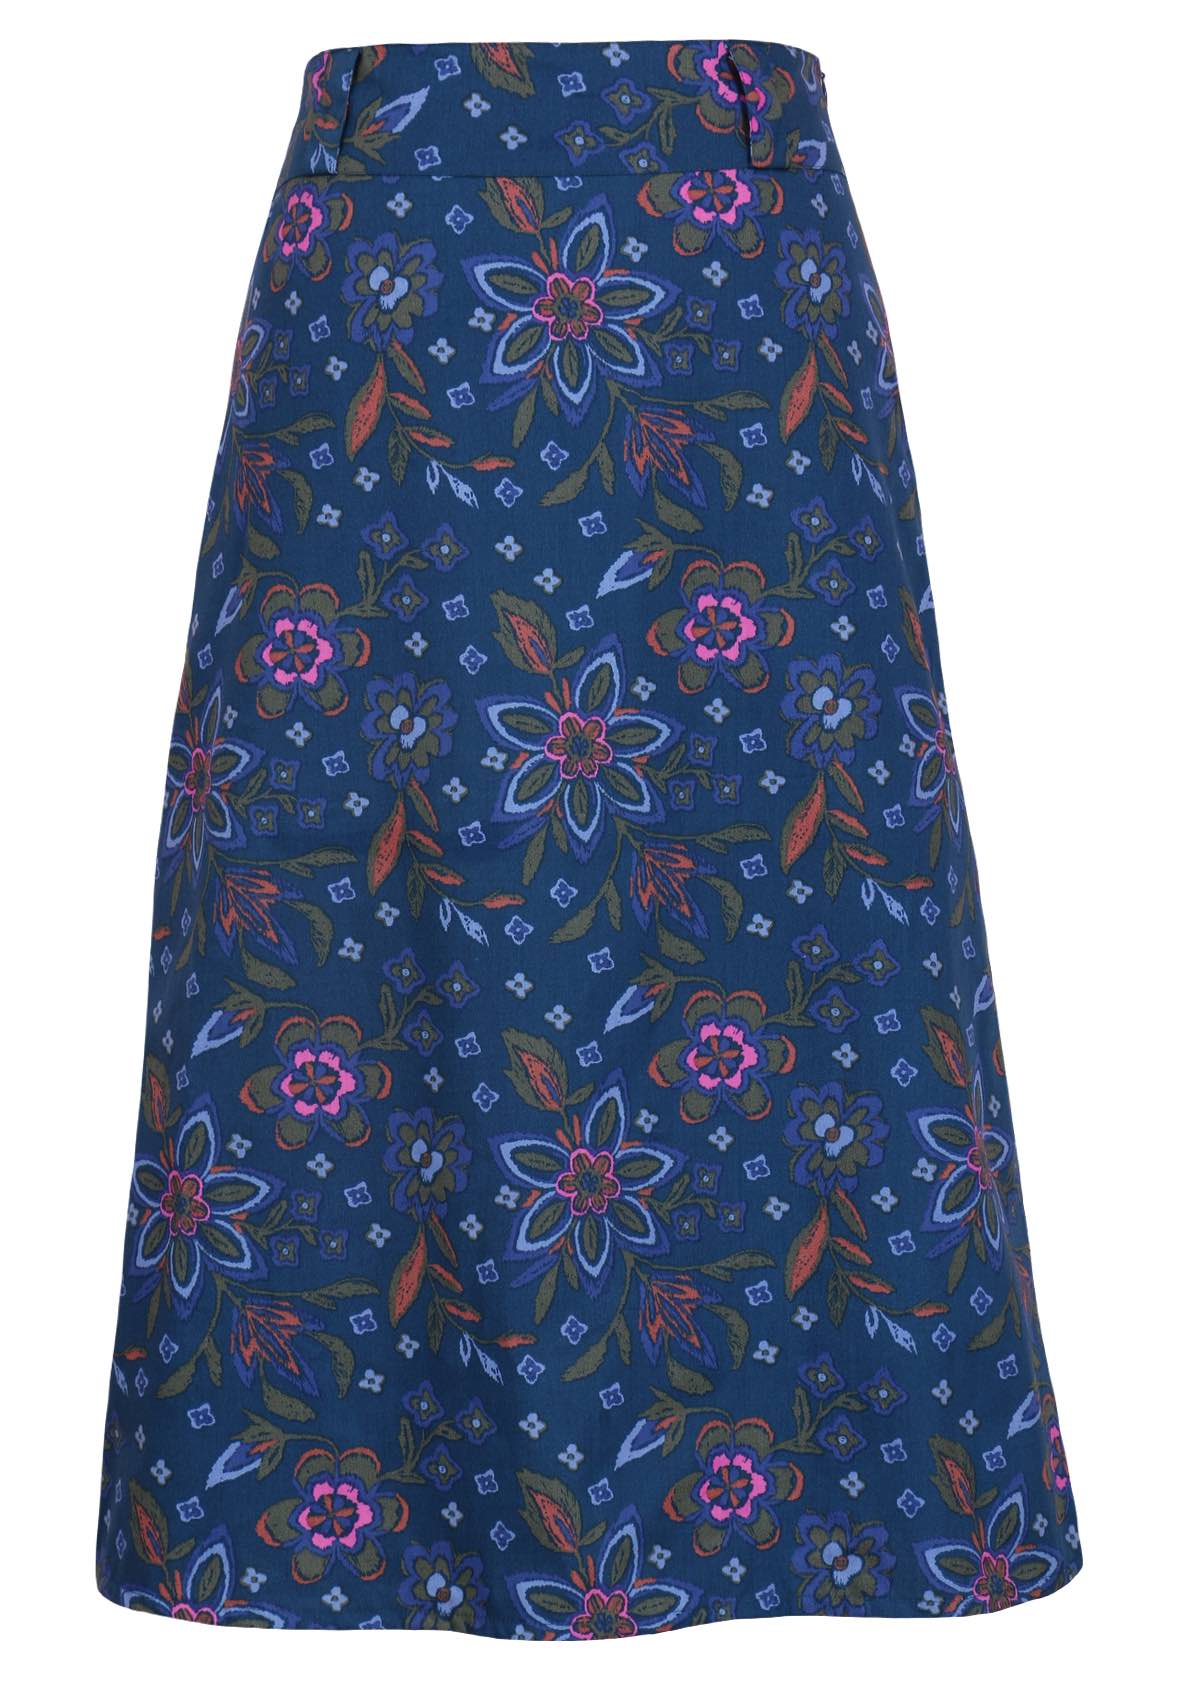 Midi length floral skirt with belt loops. 